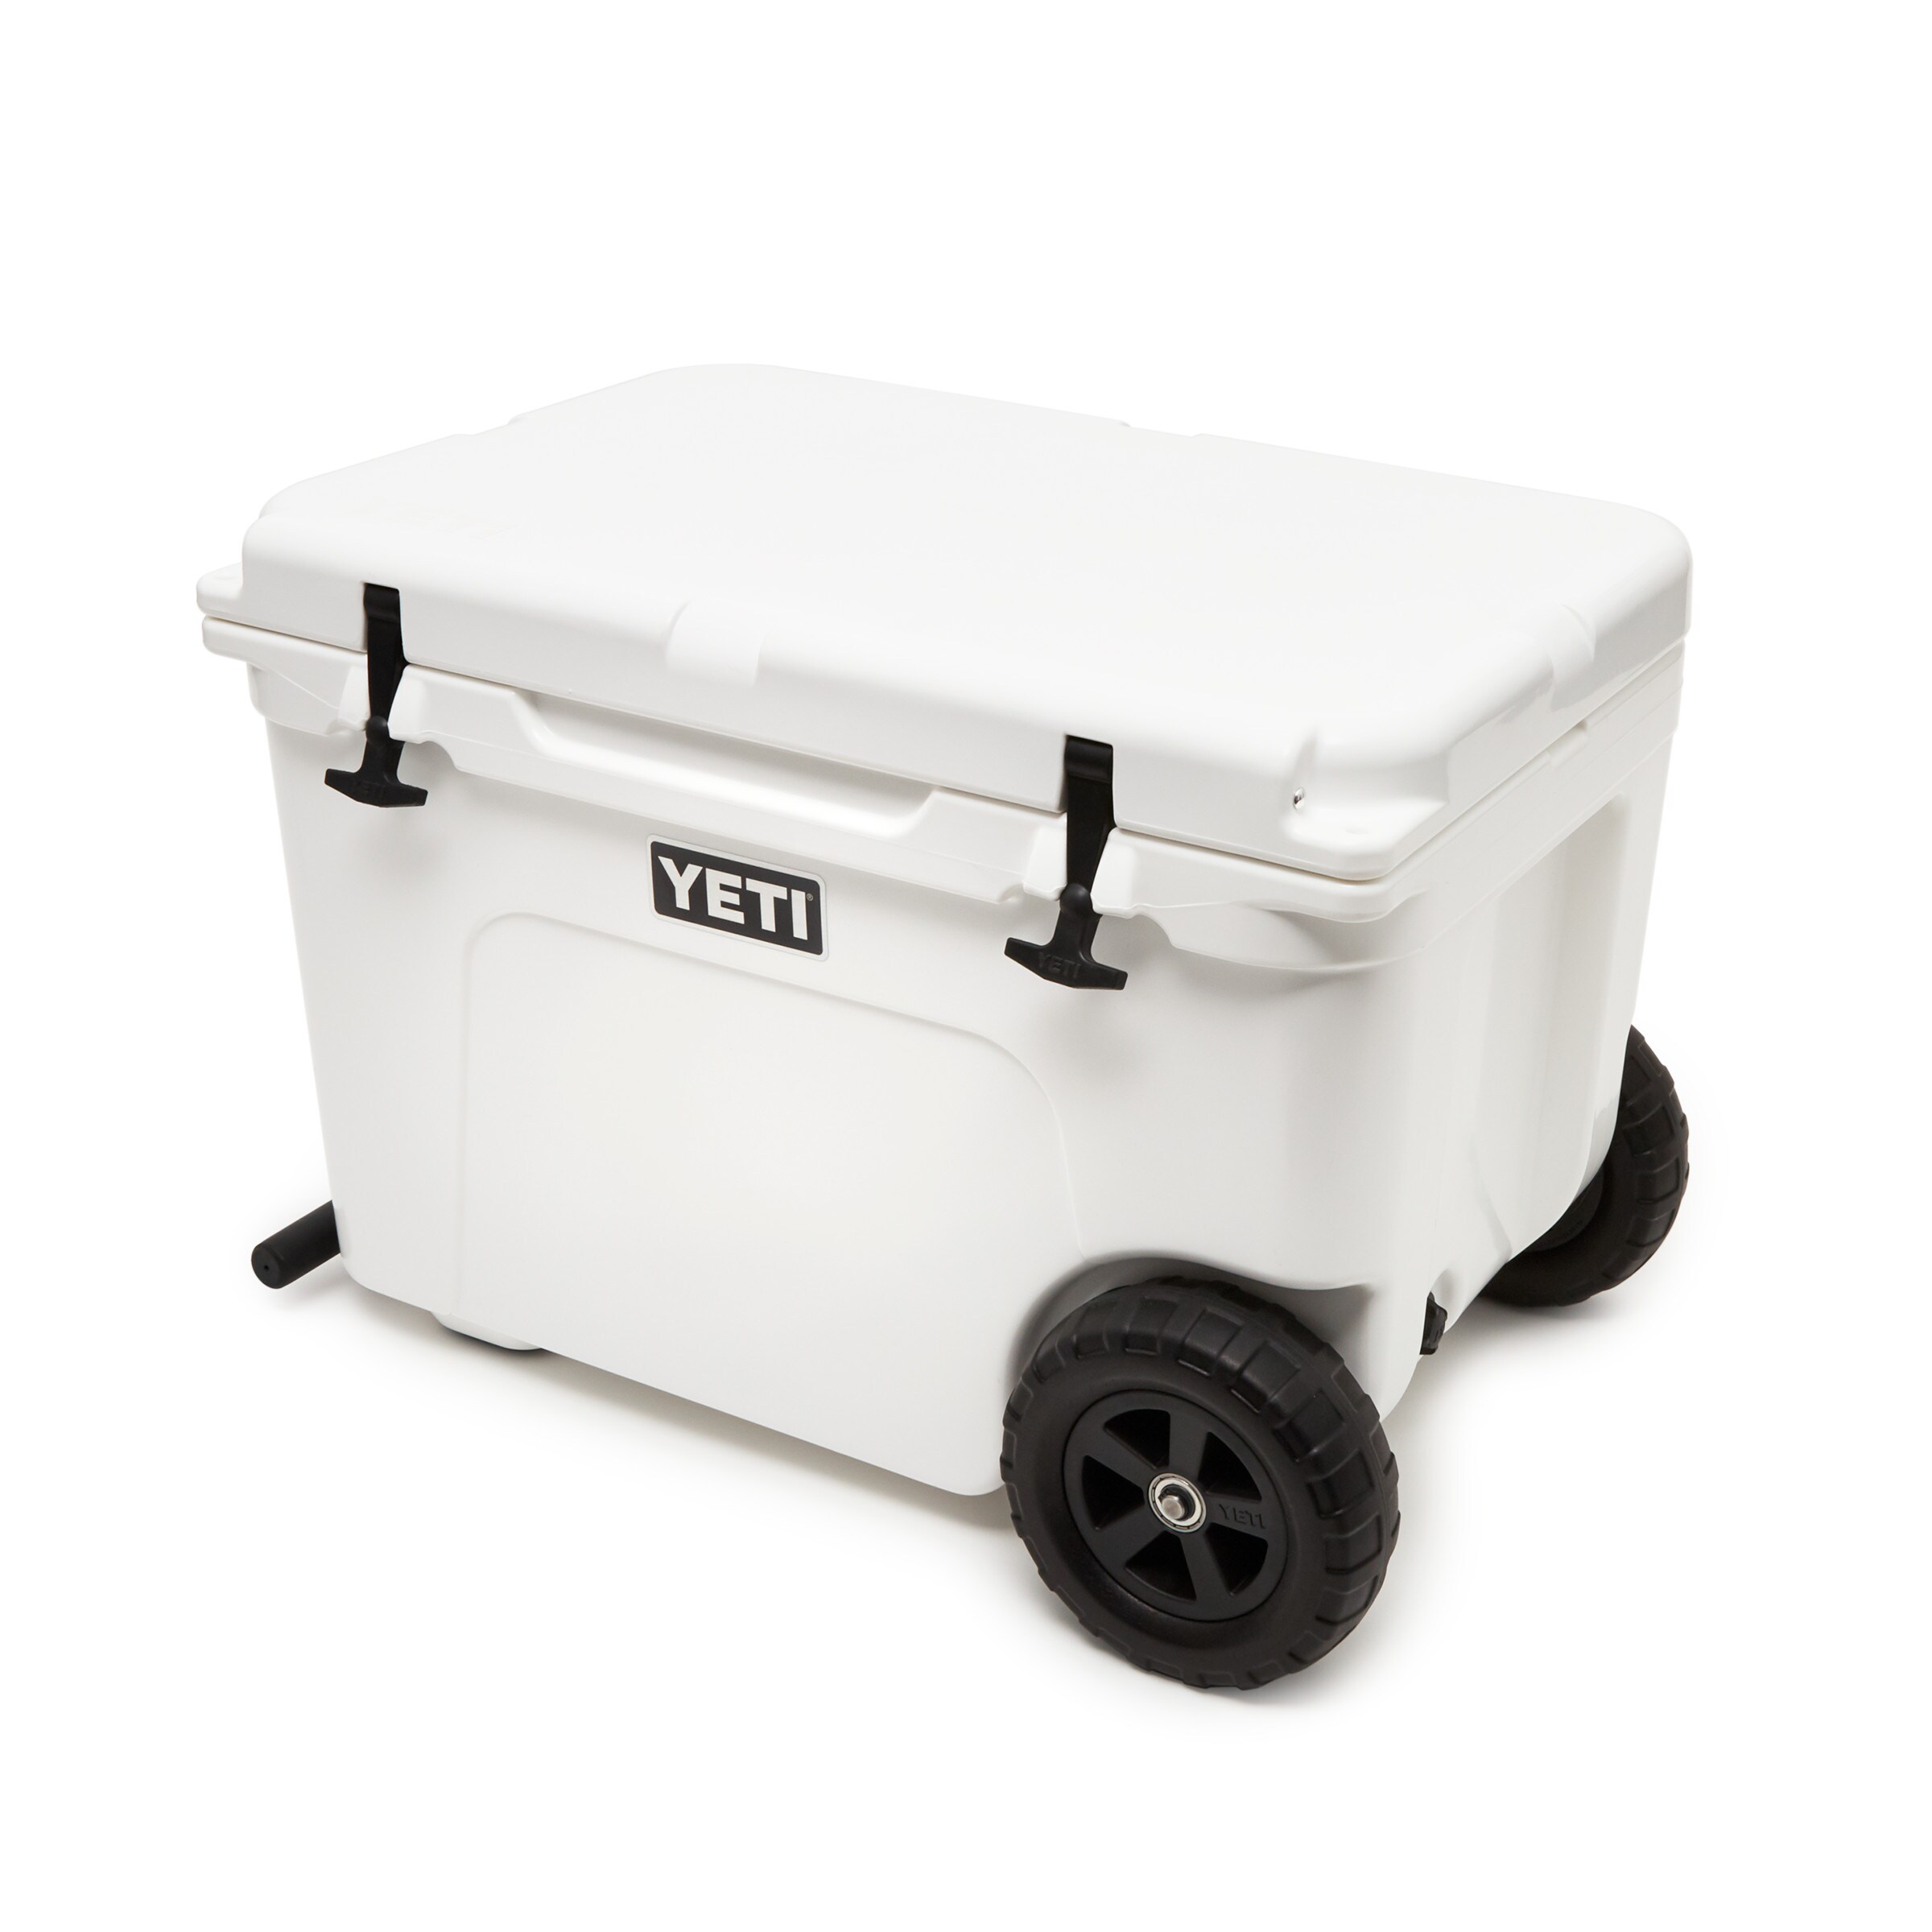 Yeti Tundra Haul Wheeled Cooler - general for sale - by owner